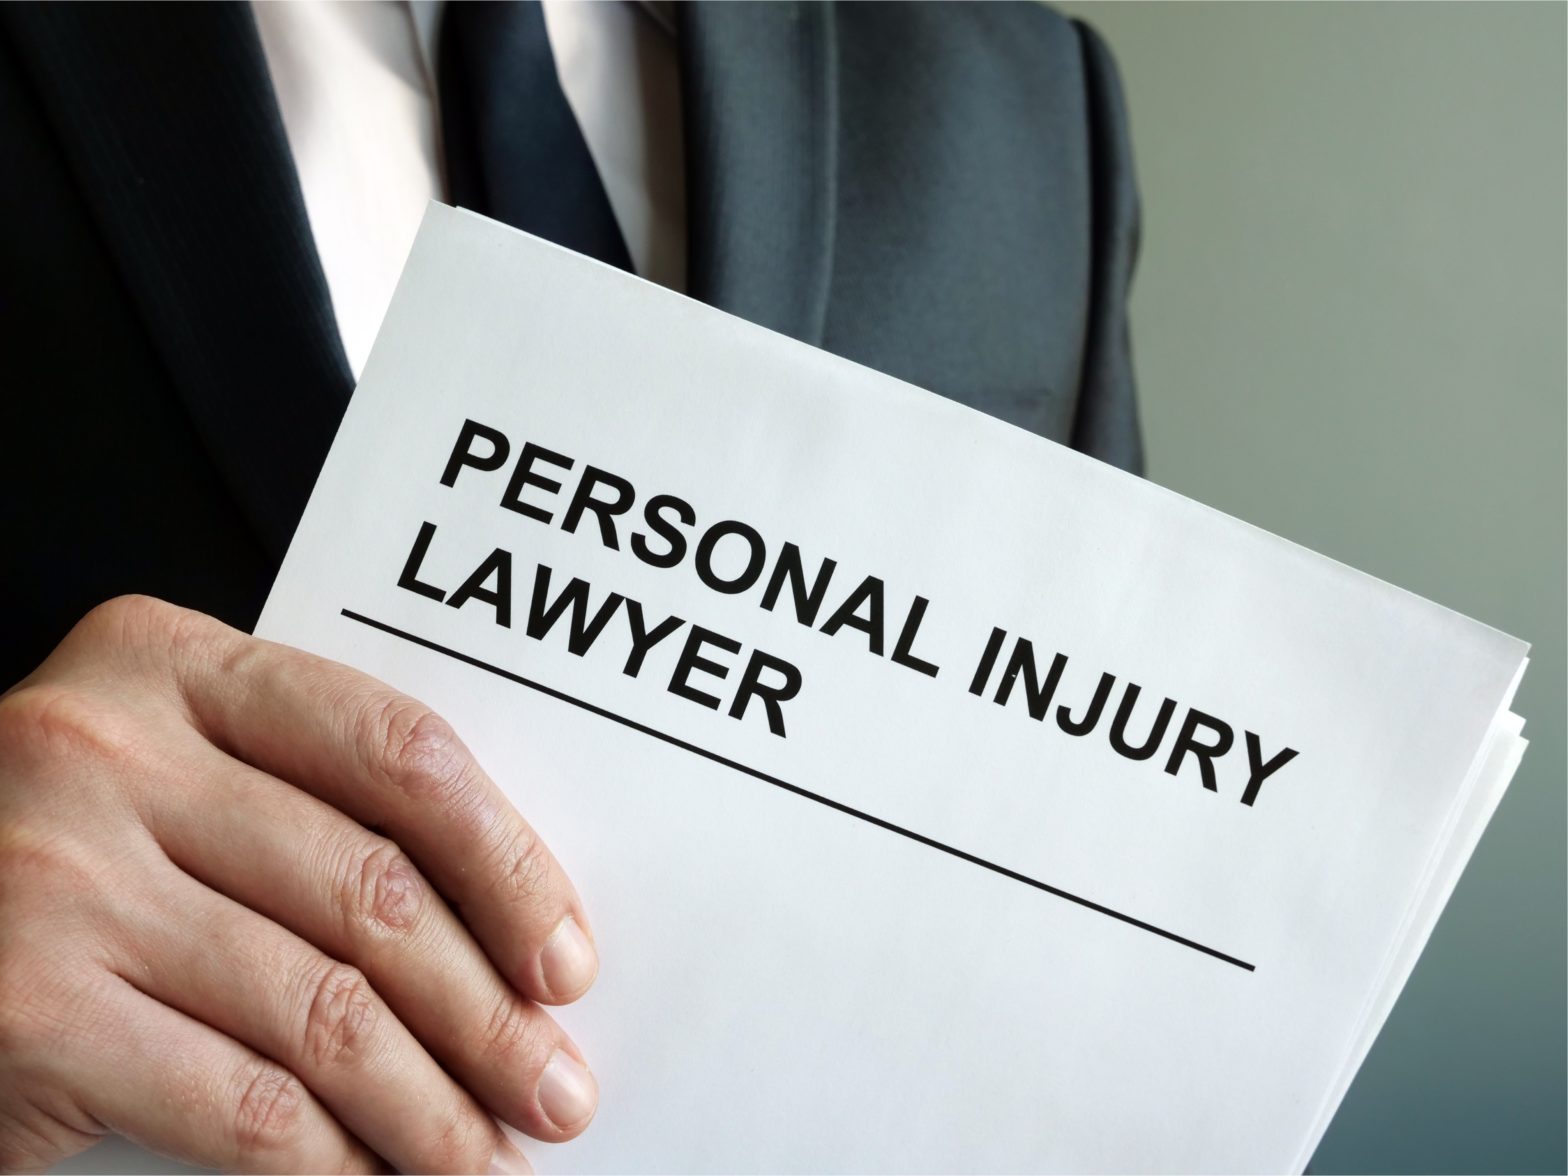 WHAT ARE THE DIFFERENT TYPES OF CASES HANDLED BY A PERSONAL INJURY LAWYER?